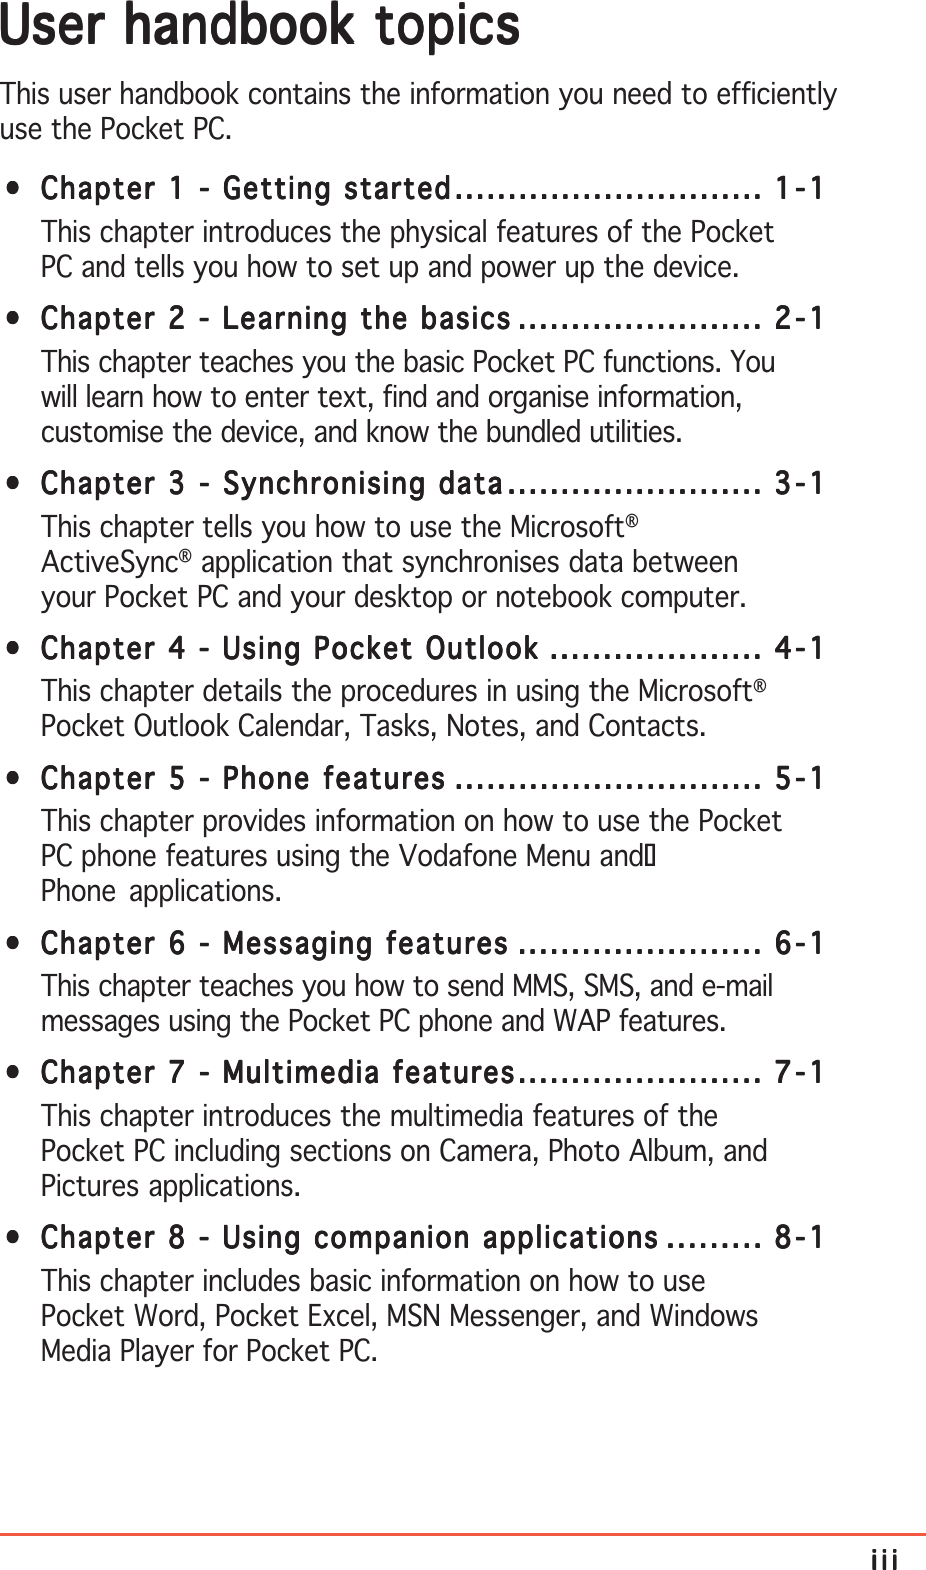 iiiiiiiiiiiiiiiUser handbook topicsUser handbook topicsUser handbook topicsUser handbook topicsUser handbook topicsThis user handbook contains the information you need to efficientlyuse the Pocket PC.•••••Chapter 1 - Getting startedChapter 1 - Getting startedChapter 1 - Getting startedChapter 1 - Getting startedChapter 1 - Getting started................................................................................................................................................. 1-11-11-11-11-1This chapter introduces the physical features of the PocketPC and tells you how to set up and power up the device.•••••Chapter 2 - Learning the basicsChapter 2 - Learning the basicsChapter 2 - Learning the basicsChapter 2 - Learning the basicsChapter 2 - Learning the basics ................................................................................................................... 2-12-12-12-12-1This chapter teaches you the basic Pocket PC functions. Youwill learn how to enter text, find and organise information,customise the device, and know the bundled utilities.•••••Chapter 3 - Synchronising dataChapter 3 - Synchronising dataChapter 3 - Synchronising dataChapter 3 - Synchronising dataChapter 3 - Synchronising data........................................................................................................................ 3-13-13-13-13-1This chapter tells you how to use the Microsoft®ActiveSync® application that synchronises data betweenyour Pocket PC and your desktop or notebook computer.•••••Chapter 4 - Using Pocket OutlookChapter 4 - Using Pocket OutlookChapter 4 - Using Pocket OutlookChapter 4 - Using Pocket OutlookChapter 4 - Using Pocket Outlook .................................................................................................... 4-14-14-14-14-1This chapter details the procedures in using the Microsoft®Pocket Outlook Calendar, Tasks, Notes, and Contacts.•••••Chapter 5 - Phone featuresChapter 5 - Phone featuresChapter 5 - Phone featuresChapter 5 - Phone featuresChapter 5 - Phone features ................................................................................................................................................. 5-15-15-15-15-1This chapter provides information on how to use the PocketPC phone features using the Vodafone Menu andPhone applications.•••••Chapter 6 - Messaging featuresChapter 6 - Messaging featuresChapter 6 - Messaging featuresChapter 6 - Messaging featuresChapter 6 - Messaging features ................................................................................................................... 6-16-16-16-16-1This chapter teaches you how to send MMS, SMS, and e-mailmessages using the Pocket PC phone and WAP features.•••••Chapter 7 - Multimedia featuresChapter 7 - Multimedia featuresChapter 7 - Multimedia featuresChapter 7 - Multimedia featuresChapter 7 - Multimedia features................................................................................................................... 7-17-17-17-17-1This chapter introduces the multimedia features of thePocket PC including sections on Camera, Photo Album, andPictures applications.•••••Chapter 8 - Using companion applicationsChapter 8 - Using companion applicationsChapter 8 - Using companion applicationsChapter 8 - Using companion applicationsChapter 8 - Using companion applications ............................................. 8-18-18-18-18-1This chapter includes basic information on how to usePocket Word, Pocket Excel, MSN Messenger, and WindowsMedia Player for Pocket PC.